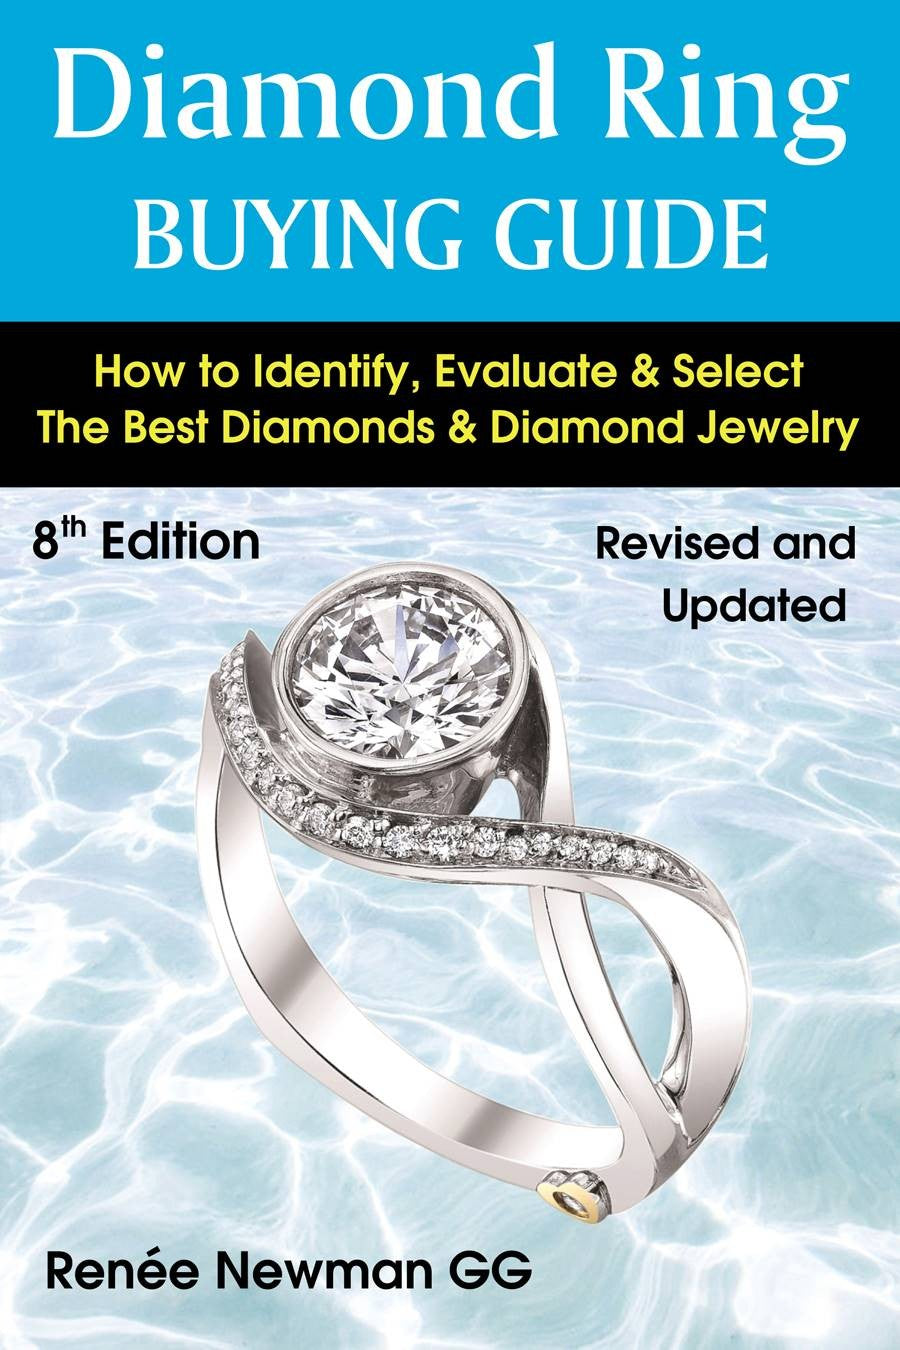 Diamond Ring Buying Guide 8th Edition